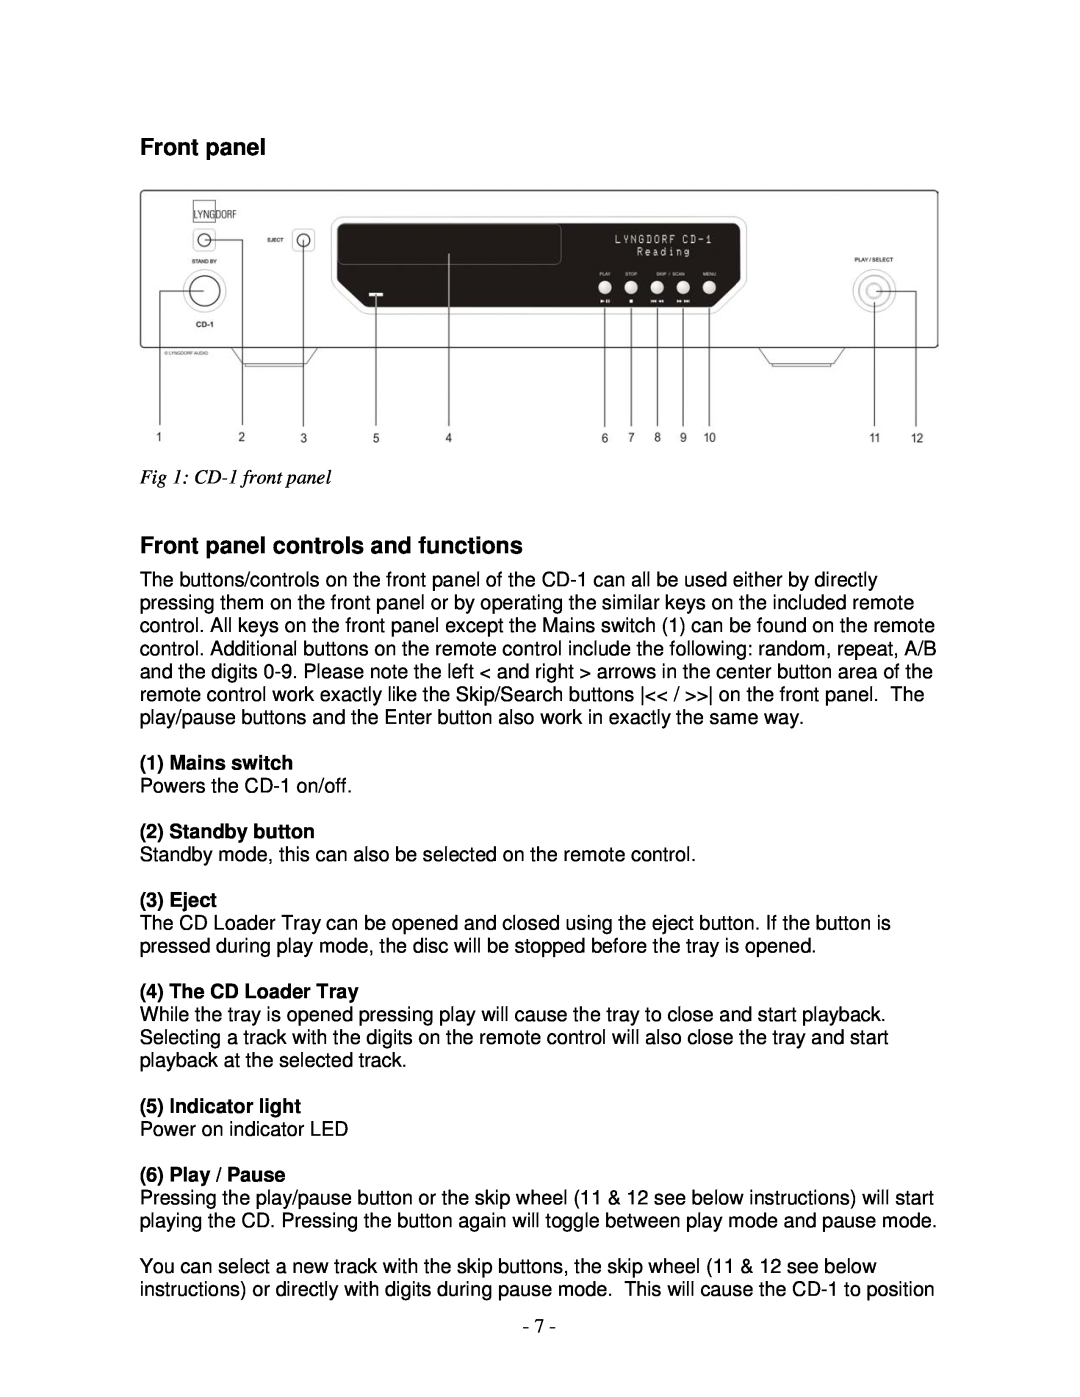 Lyngdorf Audio Front panel controls and functions, CD-1front panel, 1Mains switch Powers the CD-1on/off, Eject 